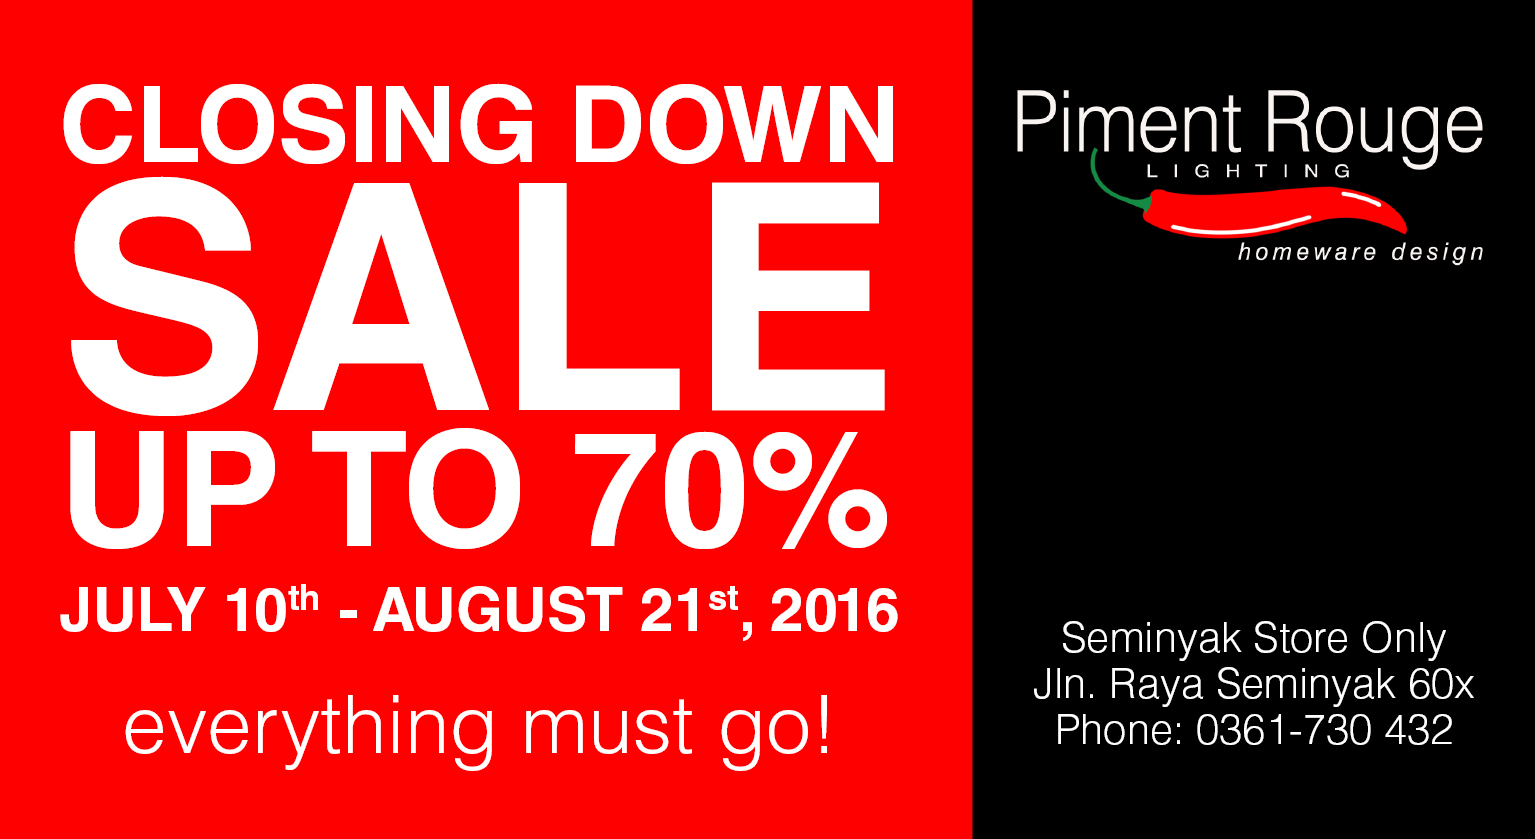 Piment Rouge Seminyak Closing Down Sale - Discount up to 70%